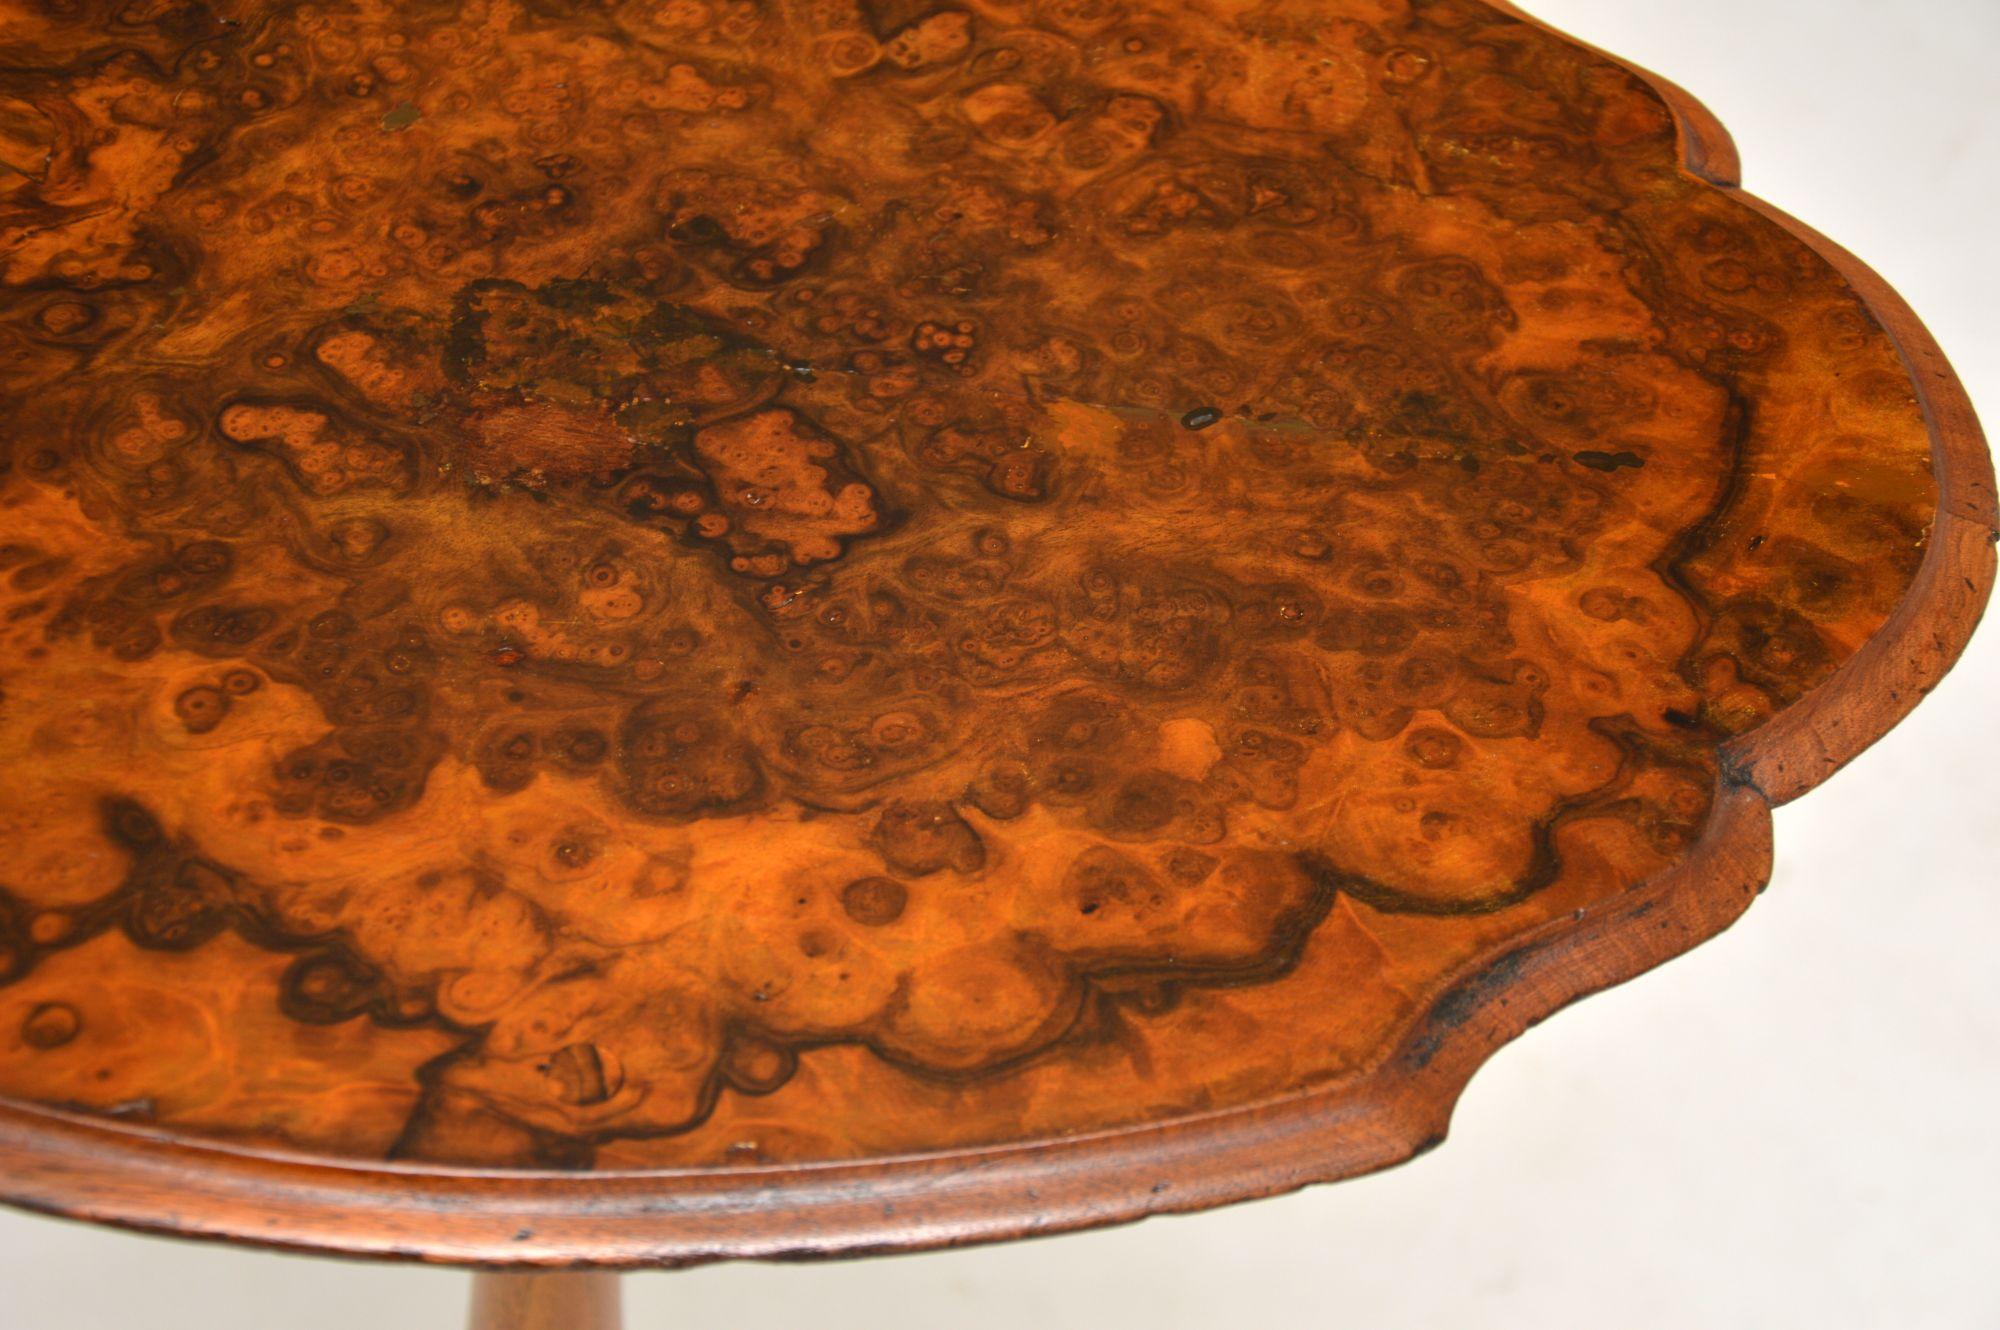 Wood Antique Victorian Burr Walnut Occasional Table